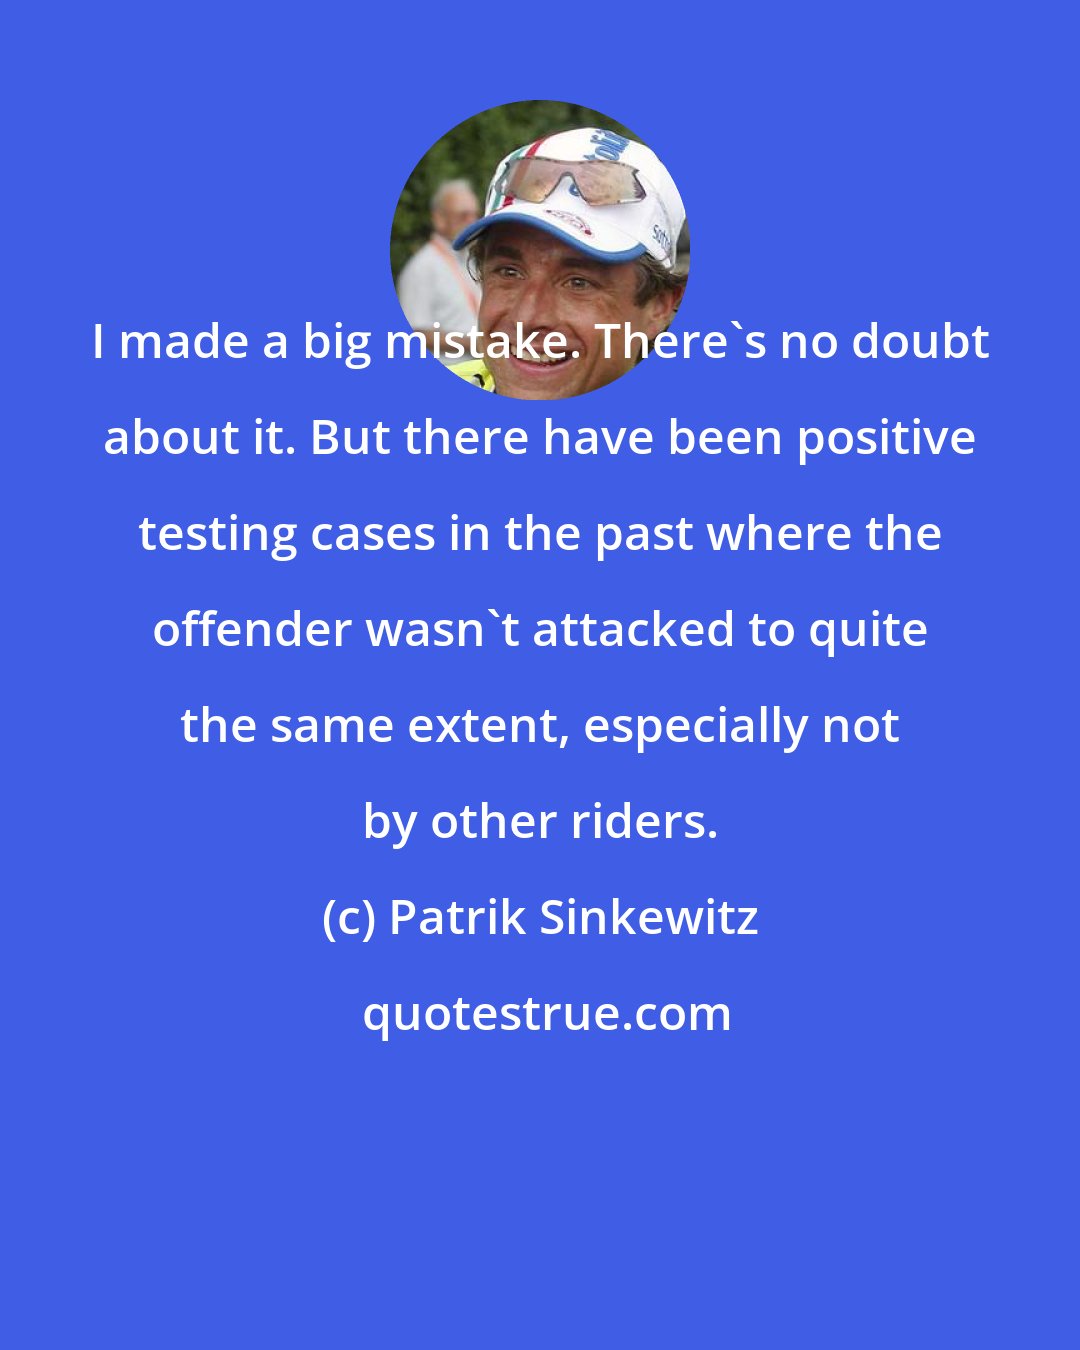 Patrik Sinkewitz: I made a big mistake. There's no doubt about it. But there have been positive testing cases in the past where the offender wasn't attacked to quite the same extent, especially not by other riders.